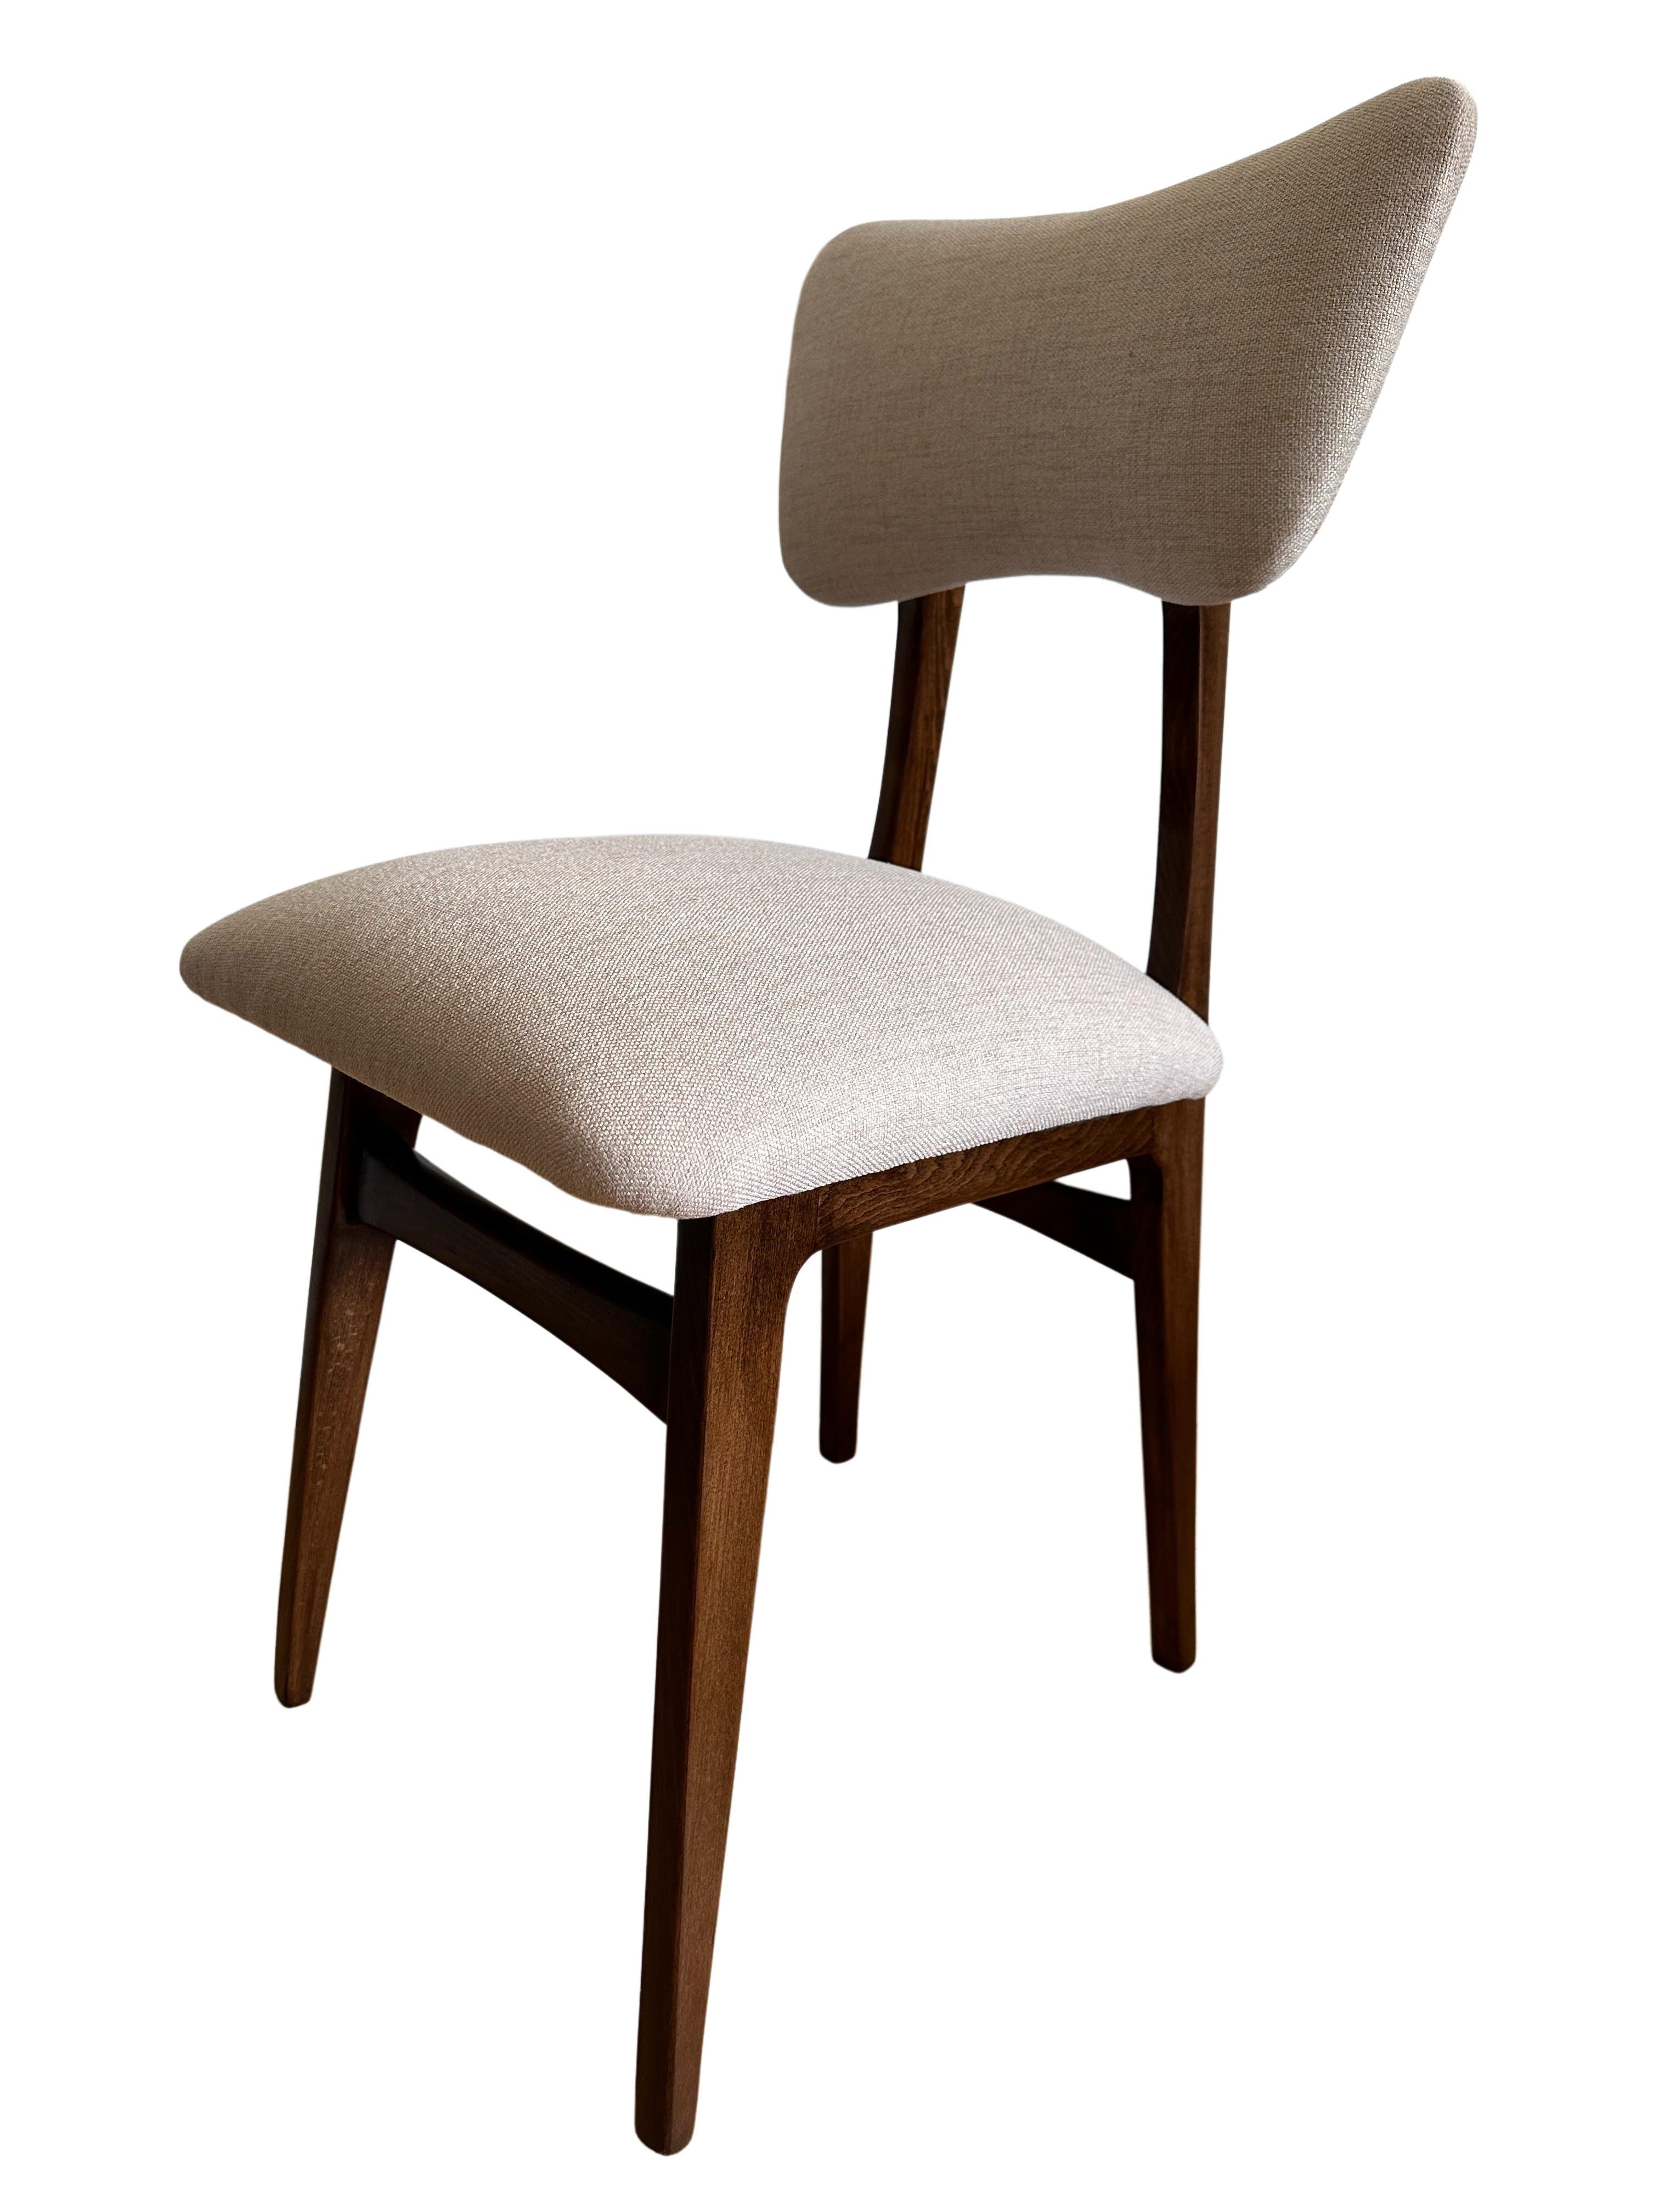 20th Century Set of 2 Midcentury Beige and Grey Dining Chairs, Europe, 1960s For Sale